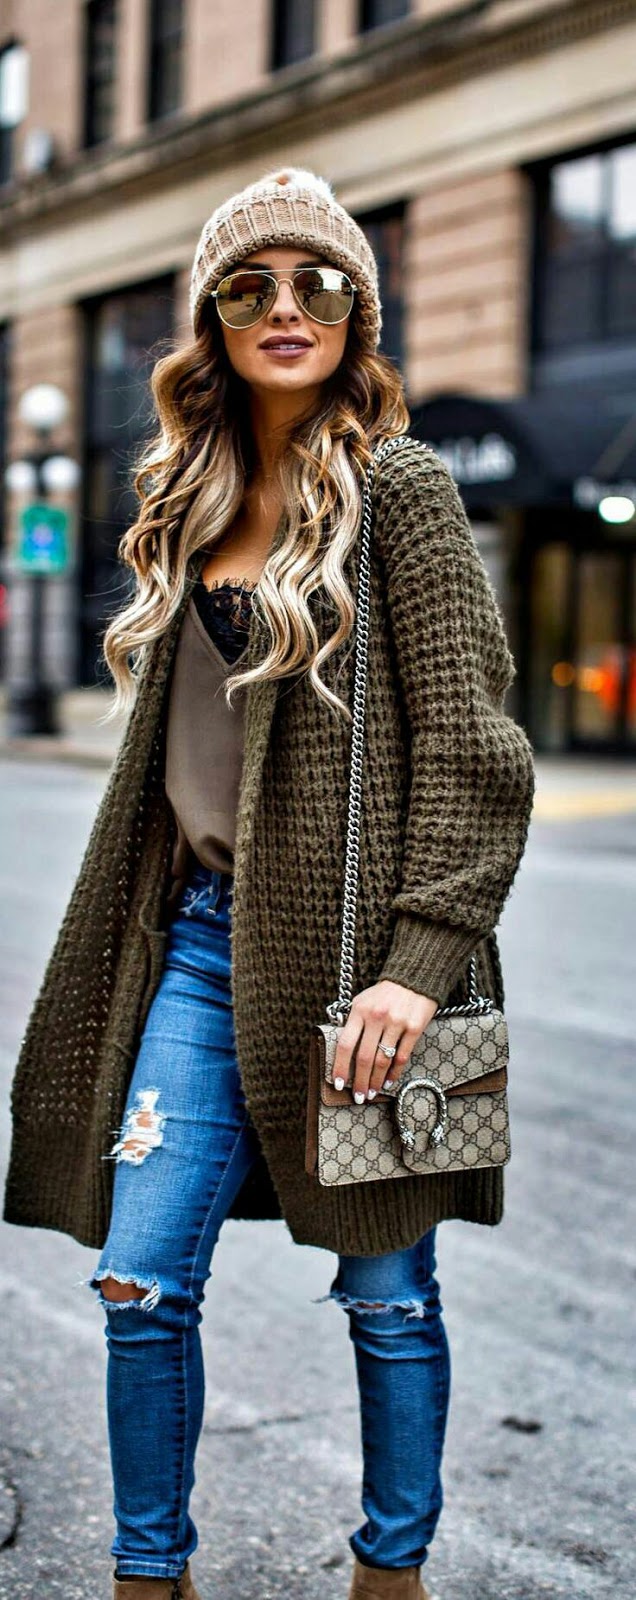 Fαshiση Gαlαxy 98 ☯: Fall outfits in winter